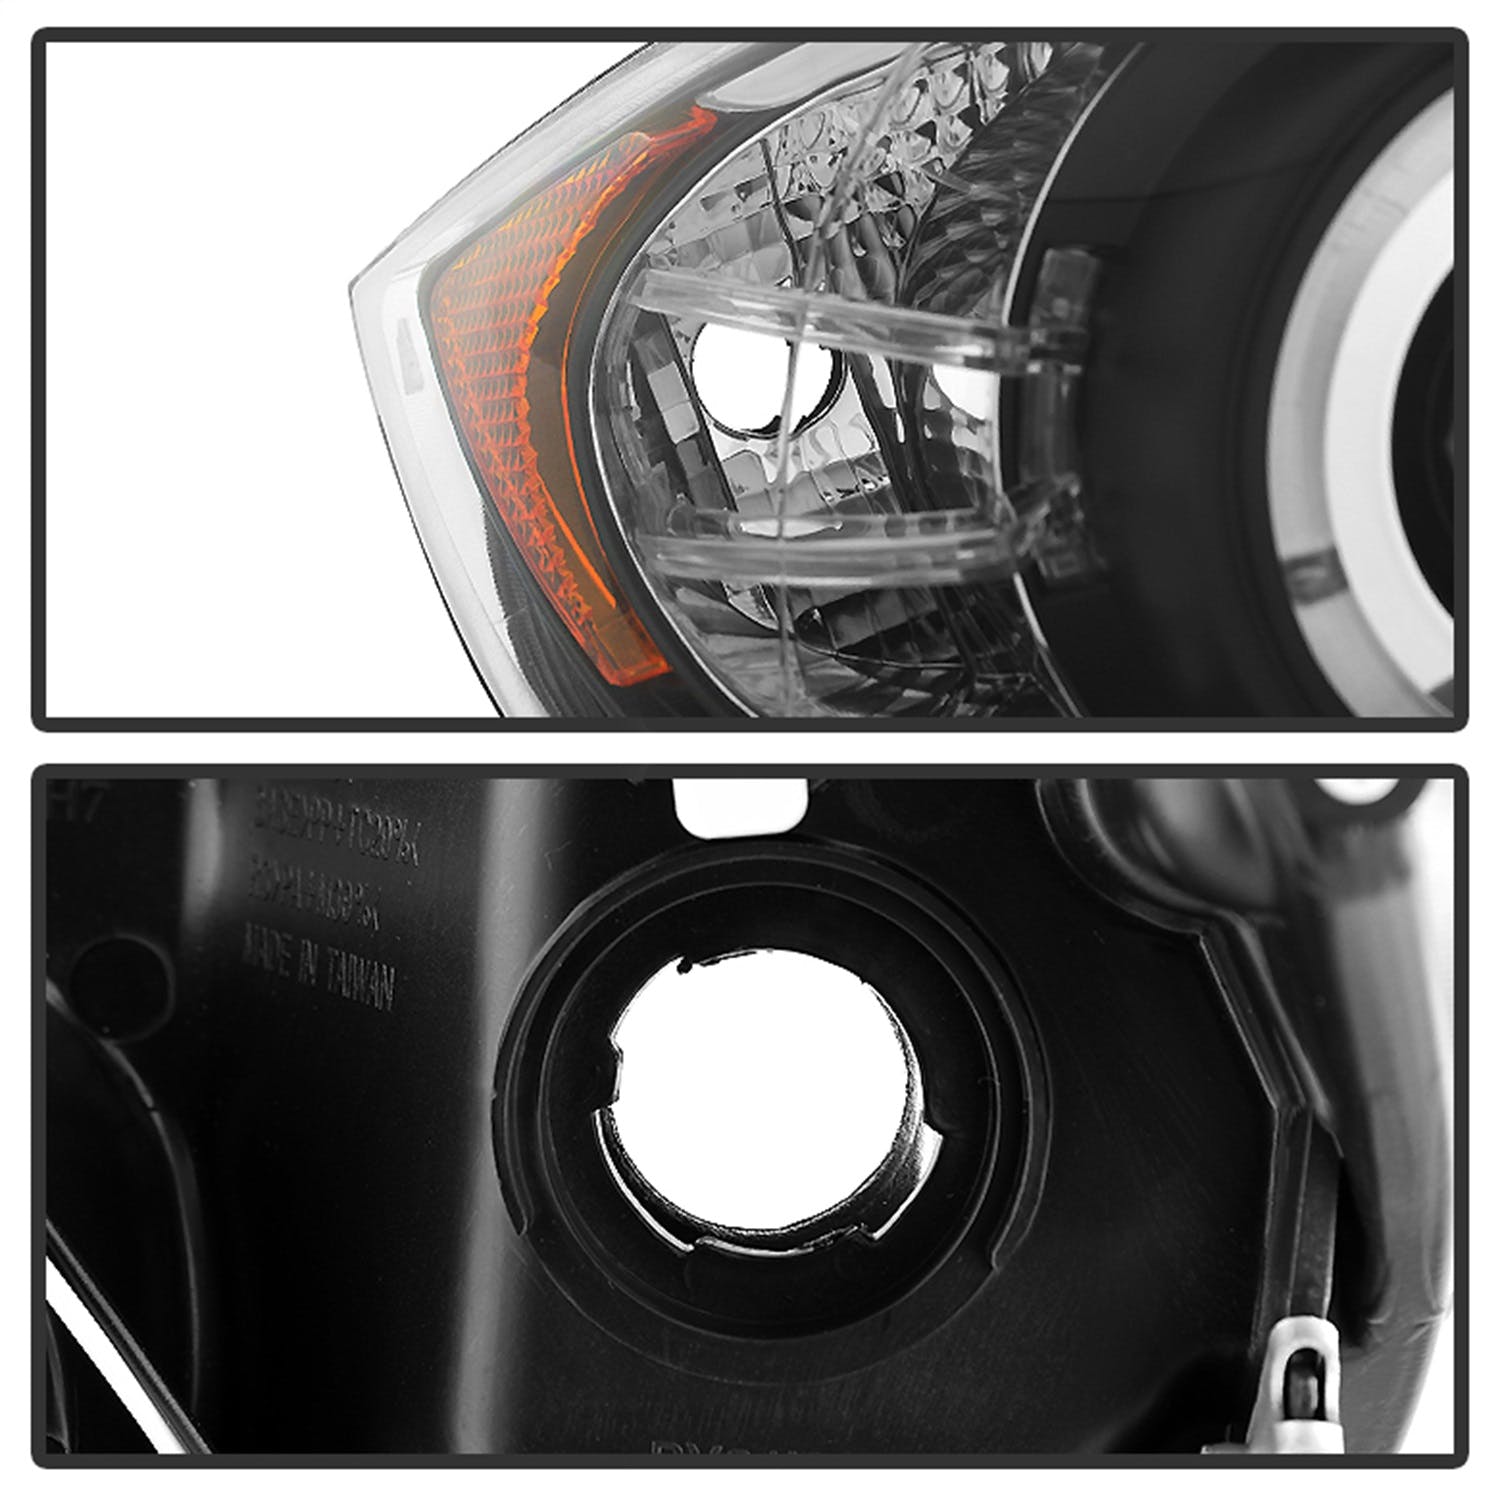 Spyder Auto 5009005 (Spyder) BMW E90 3-Series 06-08 4DR Projector Headlights-LED Halo-Amber Reflecto